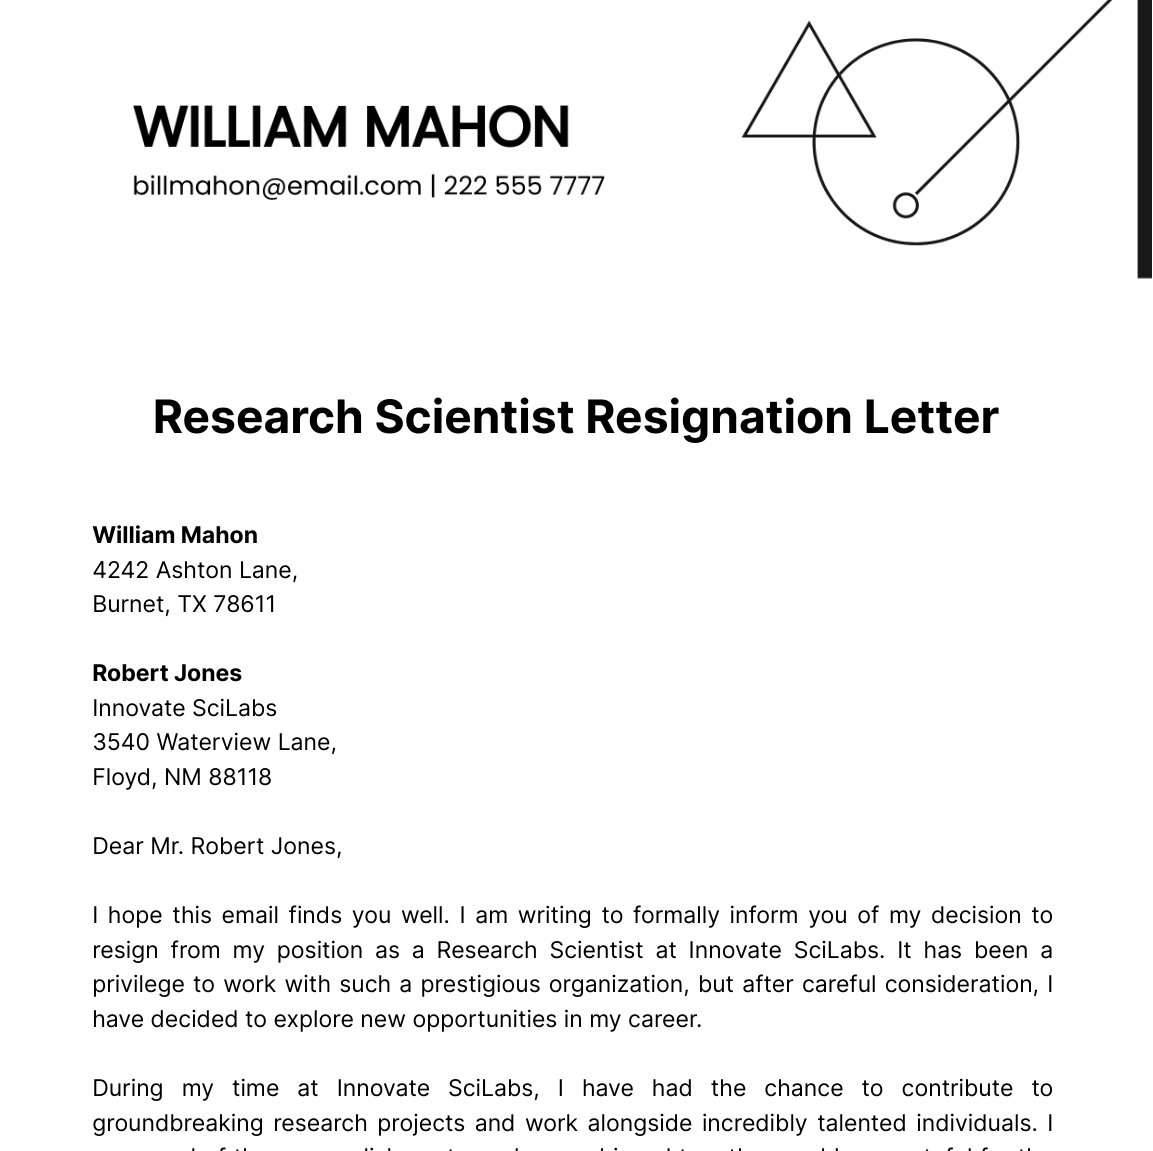 Research Scientist Resignation Letter  Template